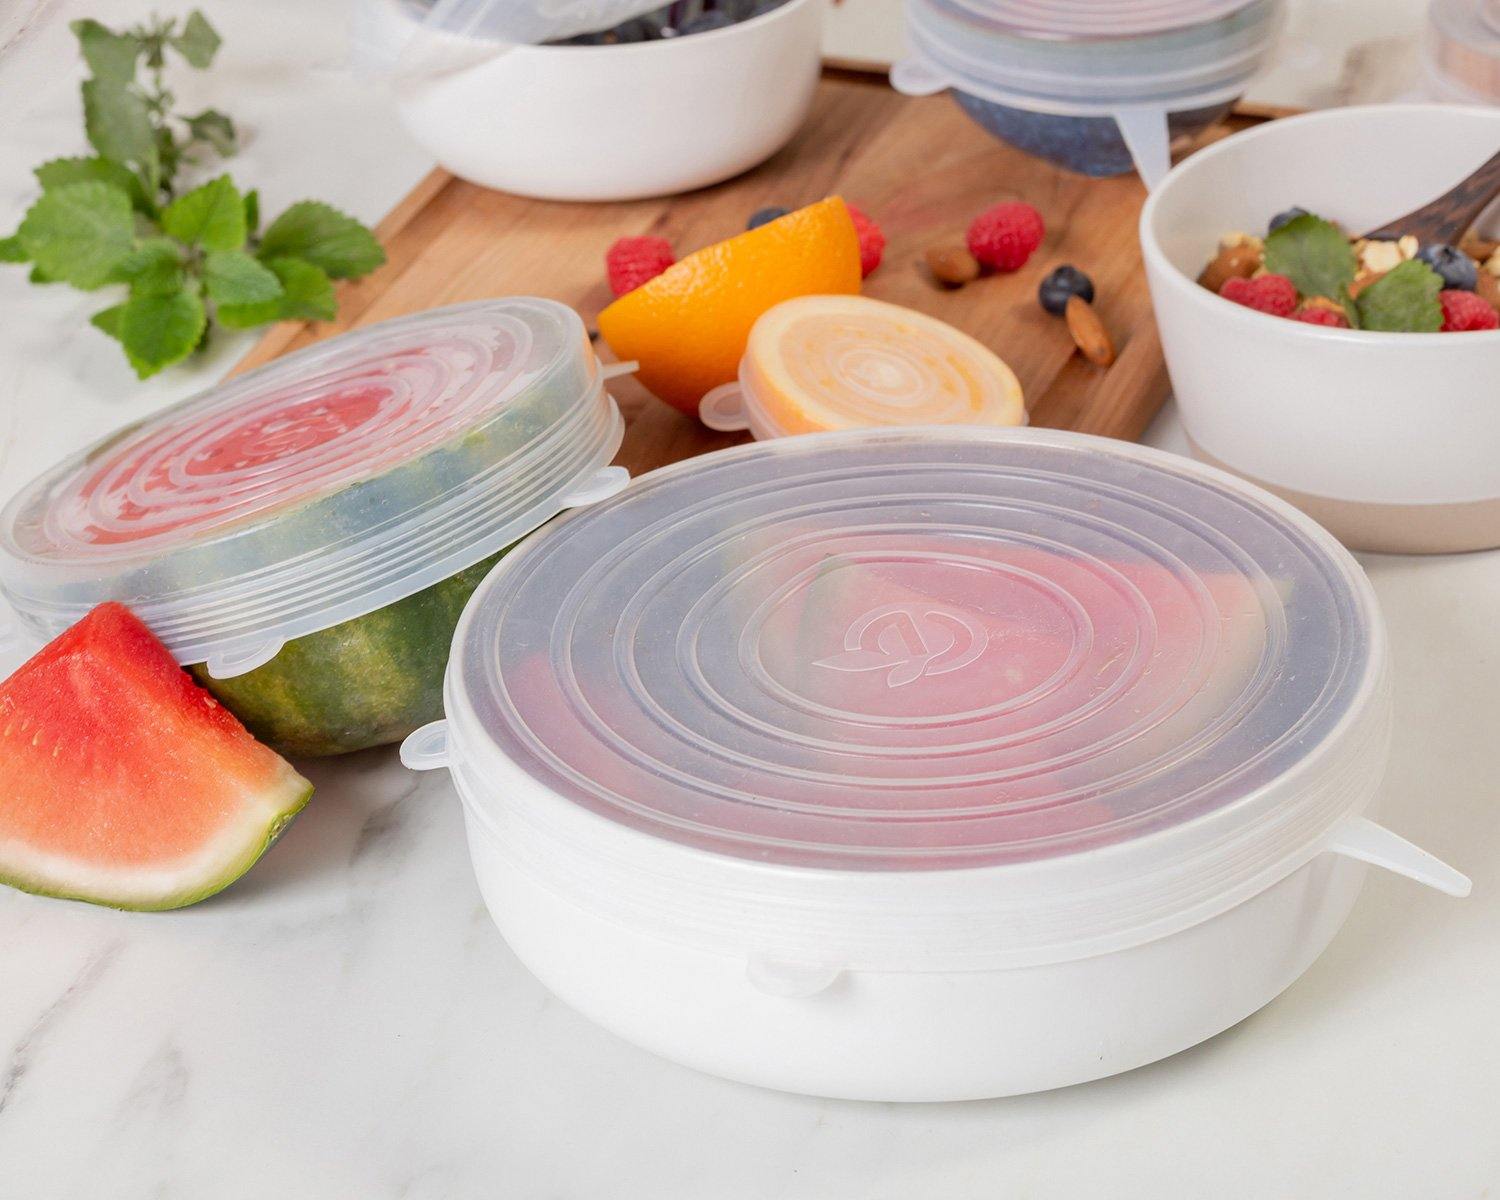 Silicone Stretch Lids Food Covers by EcoLifeMate